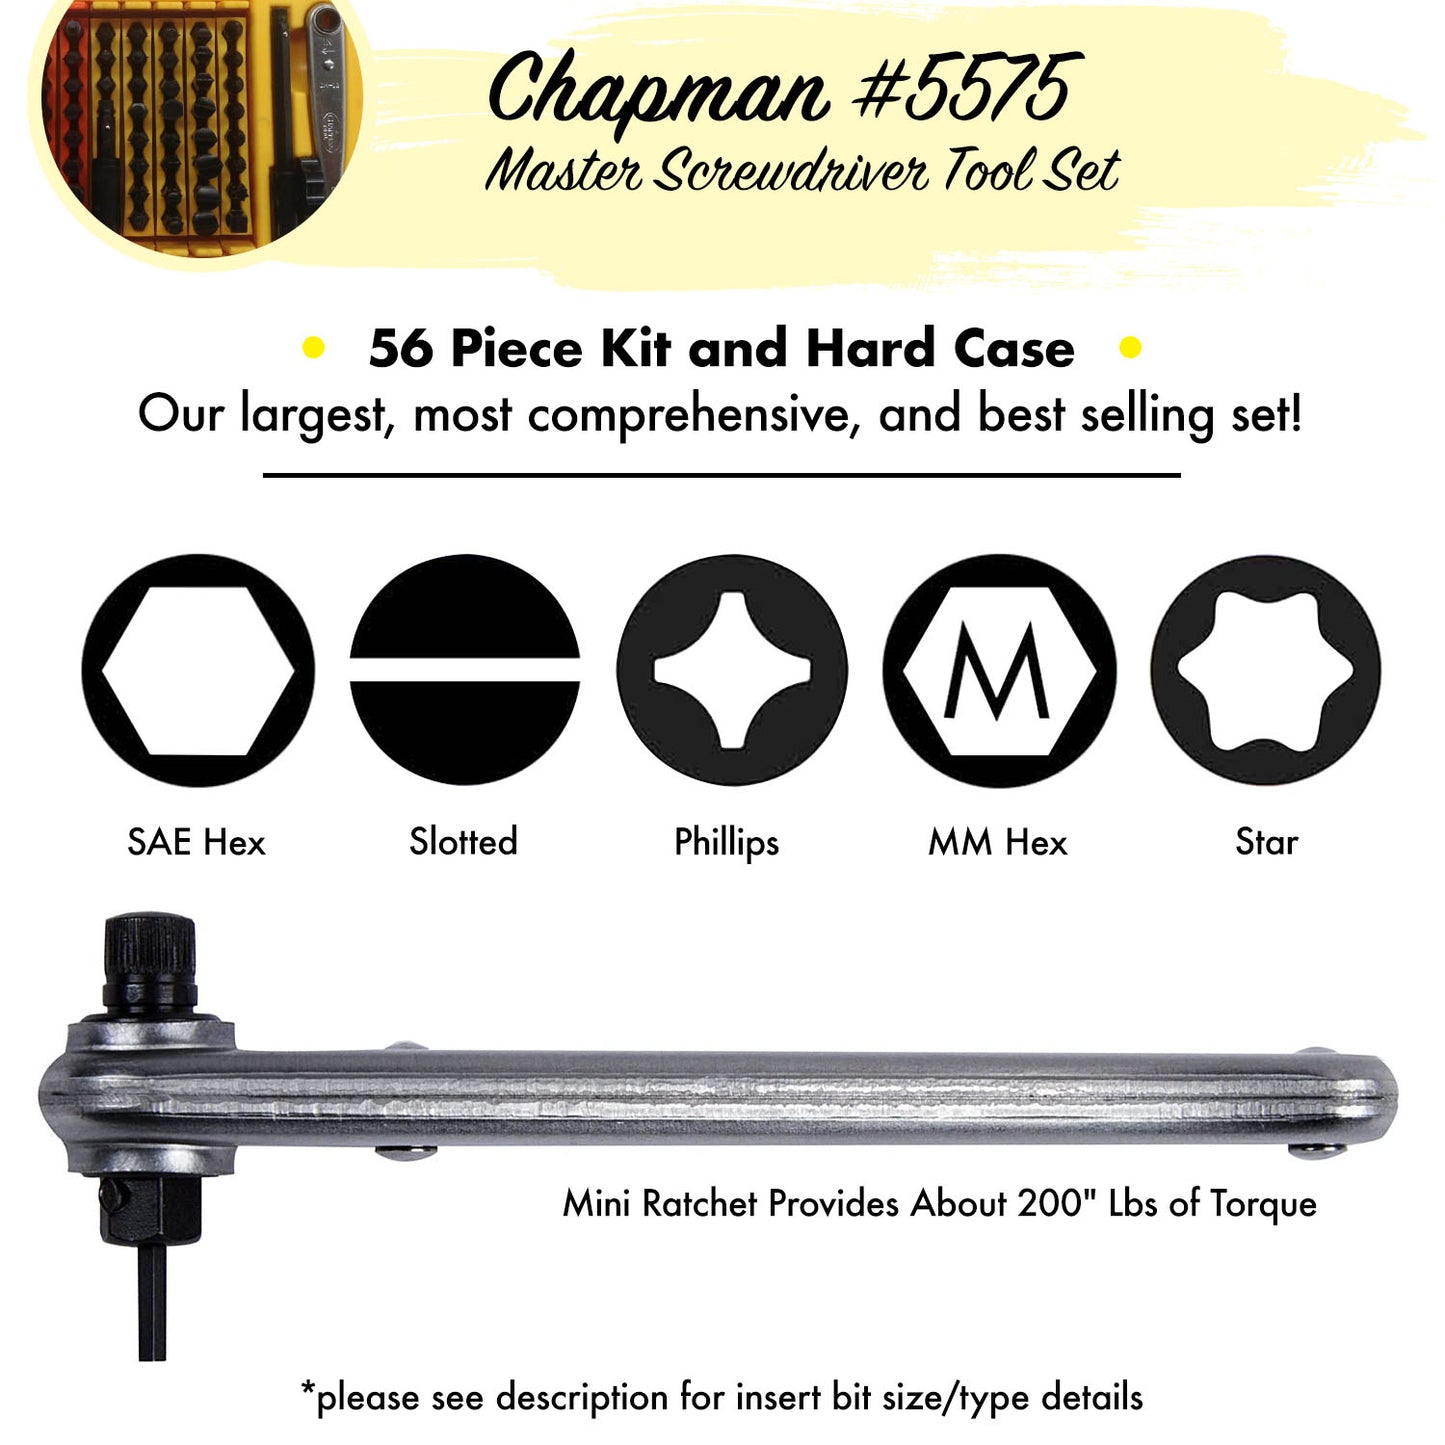 The Chapman Tools #5575 Master Screwdriver Set comes with Slotted, Phillips, Metric and SAE Hex Bits, and Star bits which fit Torx screws. This set offers 51 insert bits, over 300 tool combinations | Chapman MFG  Edit alt text